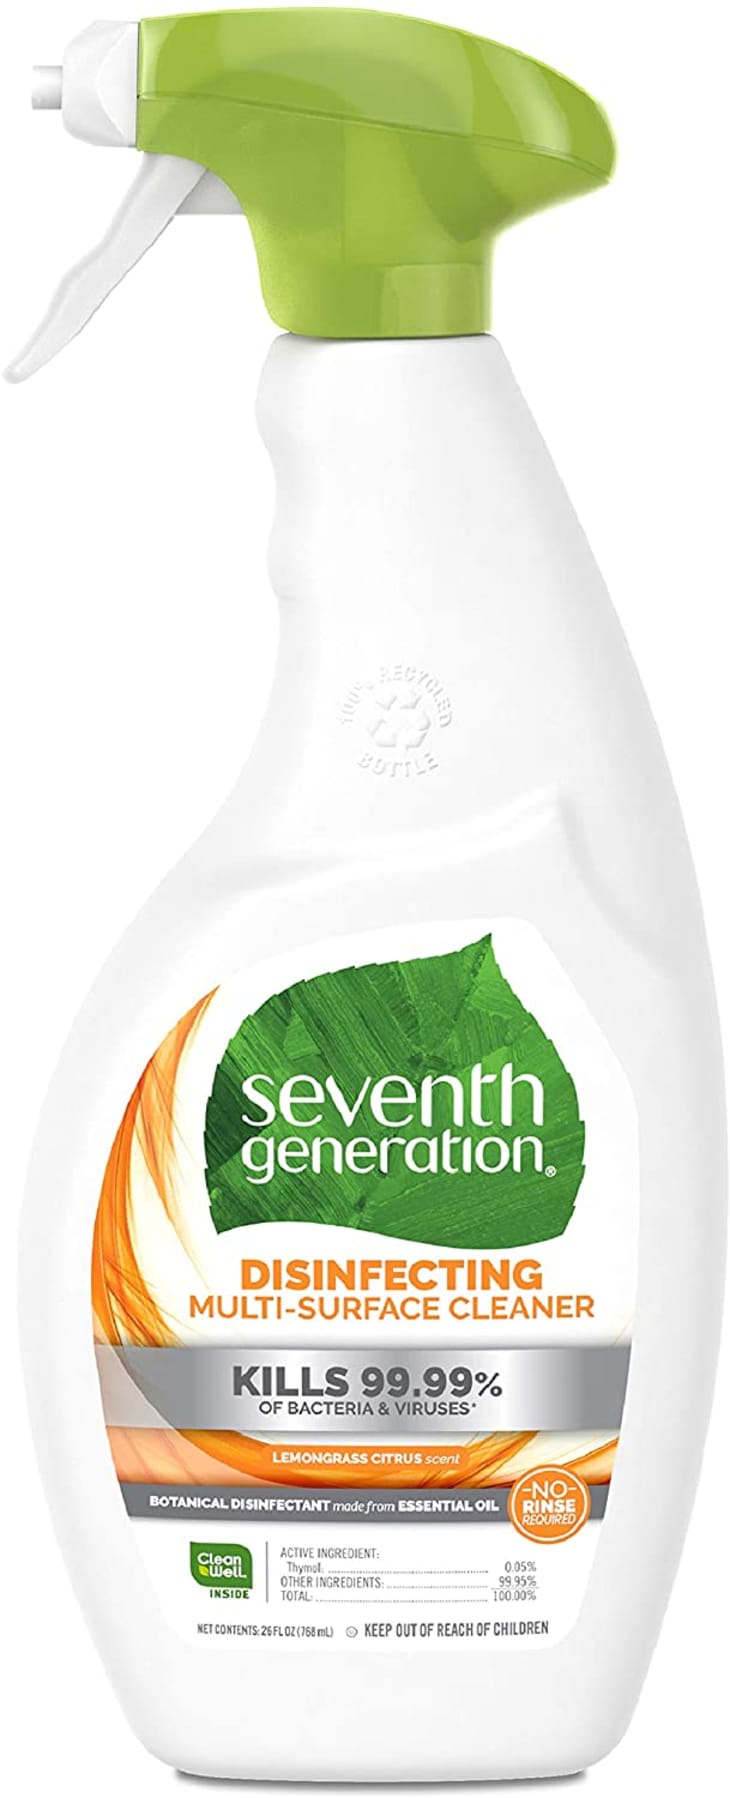 Seventh Generation Disinfecting Multi-Surface Cleaner at Amazon